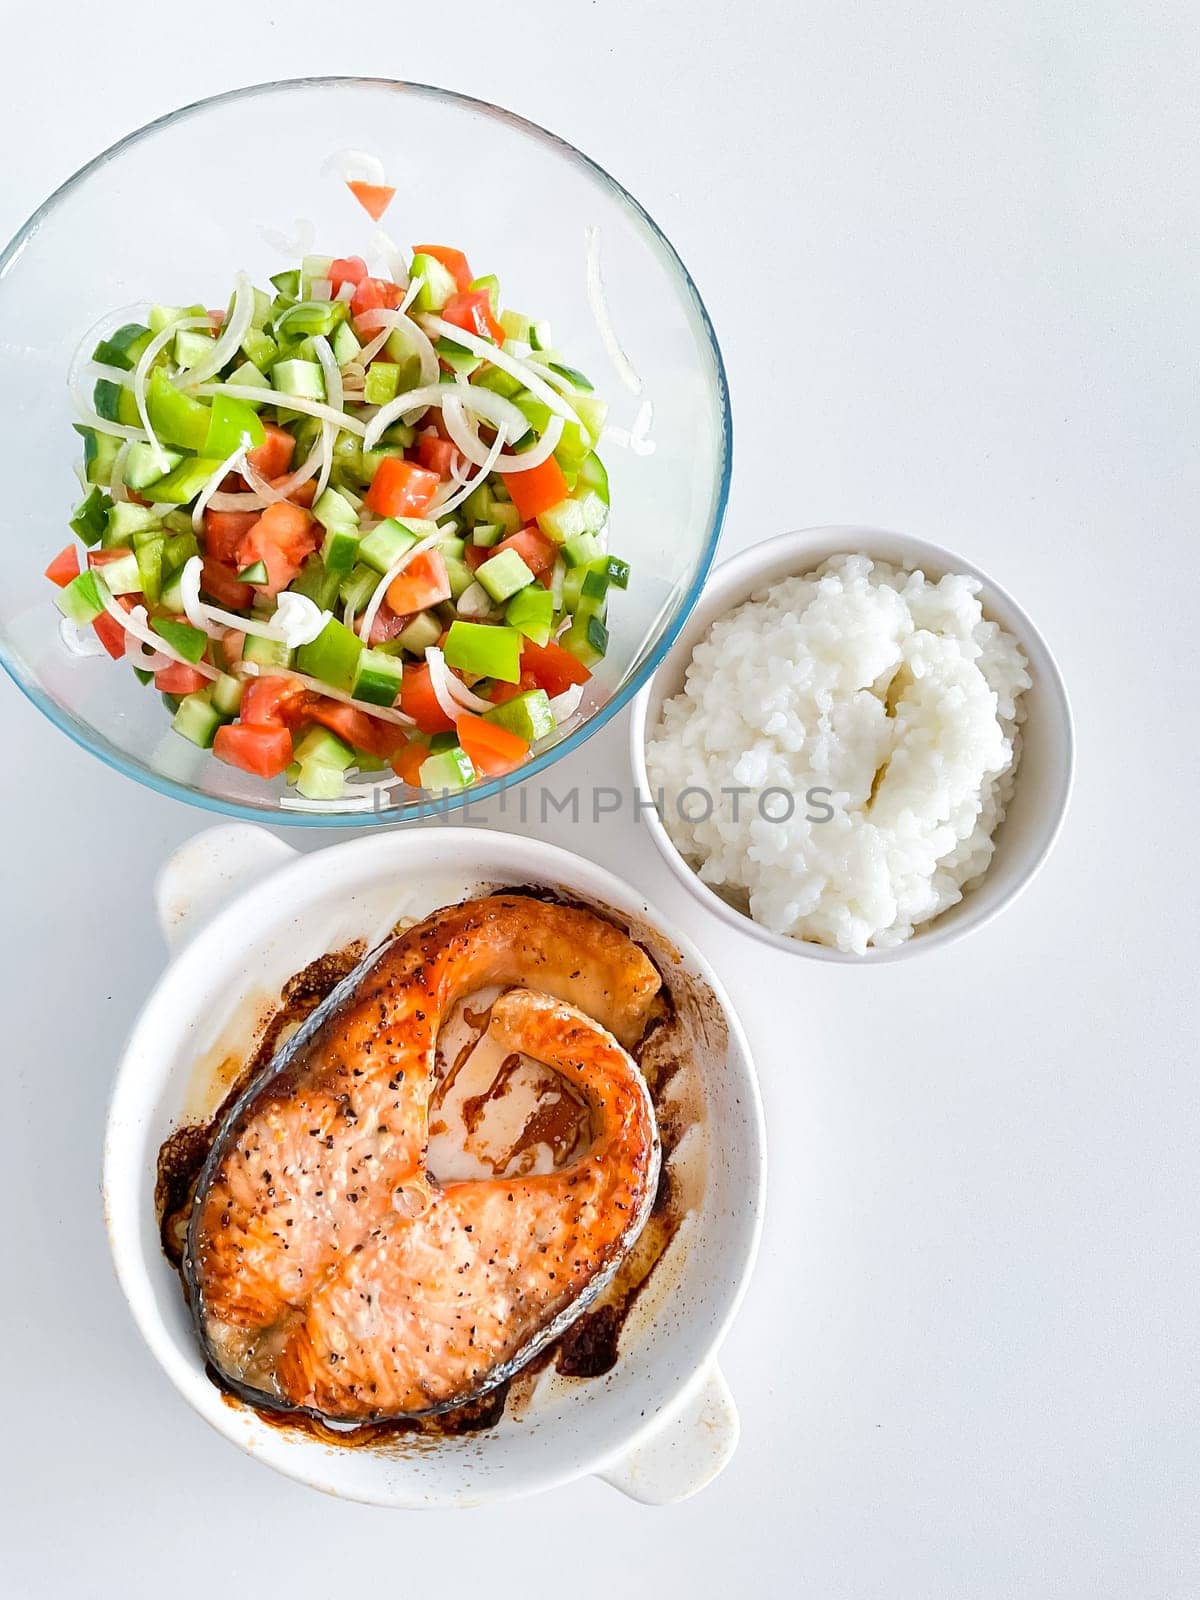 Healthy balanced meal lunch plate - baked salmon by Lunnica